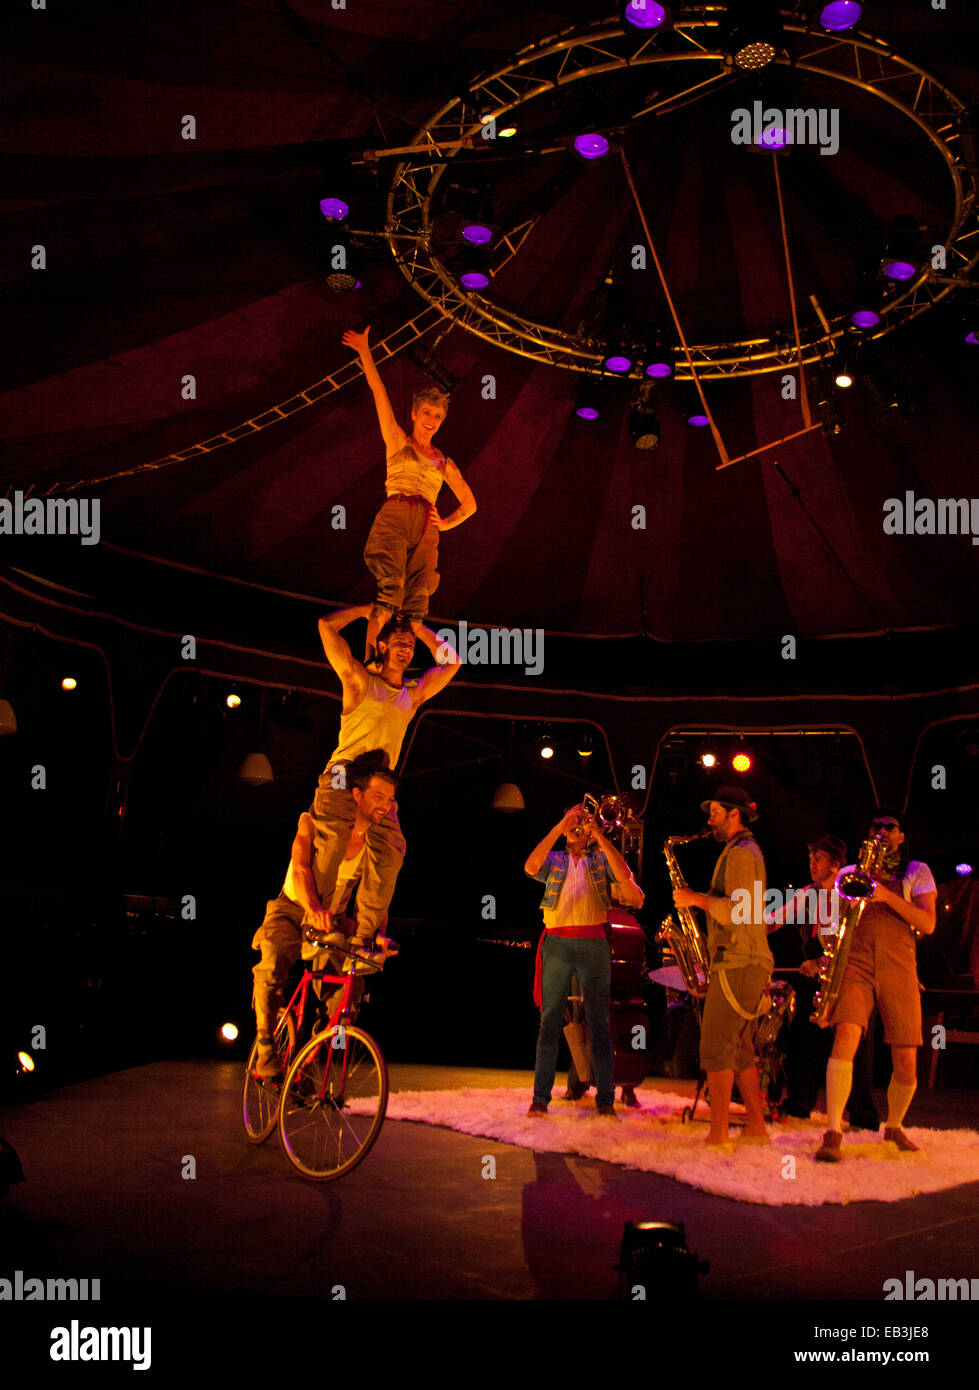 Edinburgh, St Andrew Square, Scotland. 25th Nov. 2014 Scotch and Soda – photo-call. The headline circus act at this years Edinburgh's Christmas. The company will present three set pieces from the show that has its European premier on Wed 26th November. Stock Photo